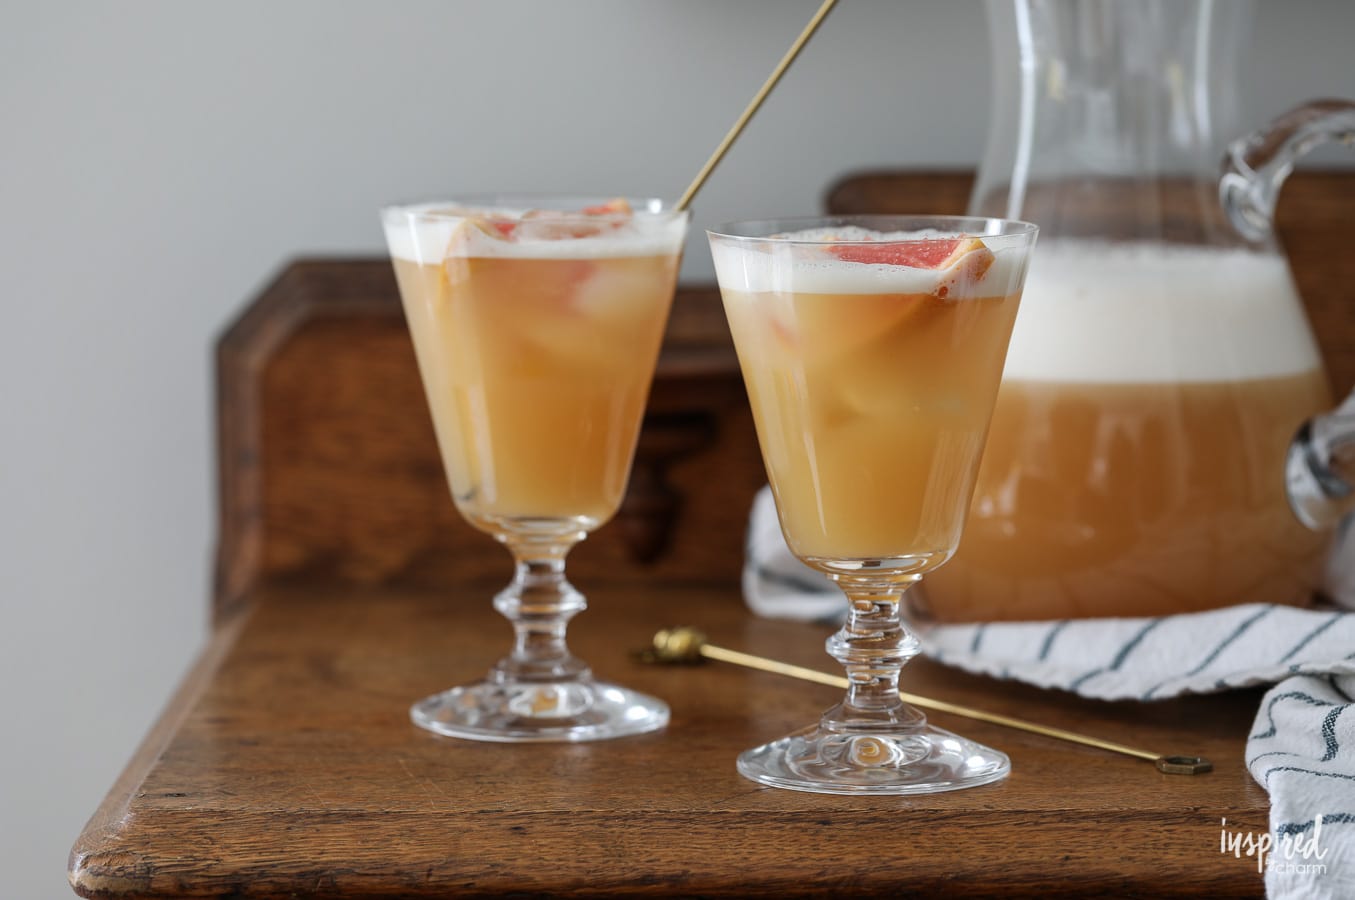 A delicious Bees Knees Cocktail recipe! #beesknees #cocktail #recipe #summer #spring